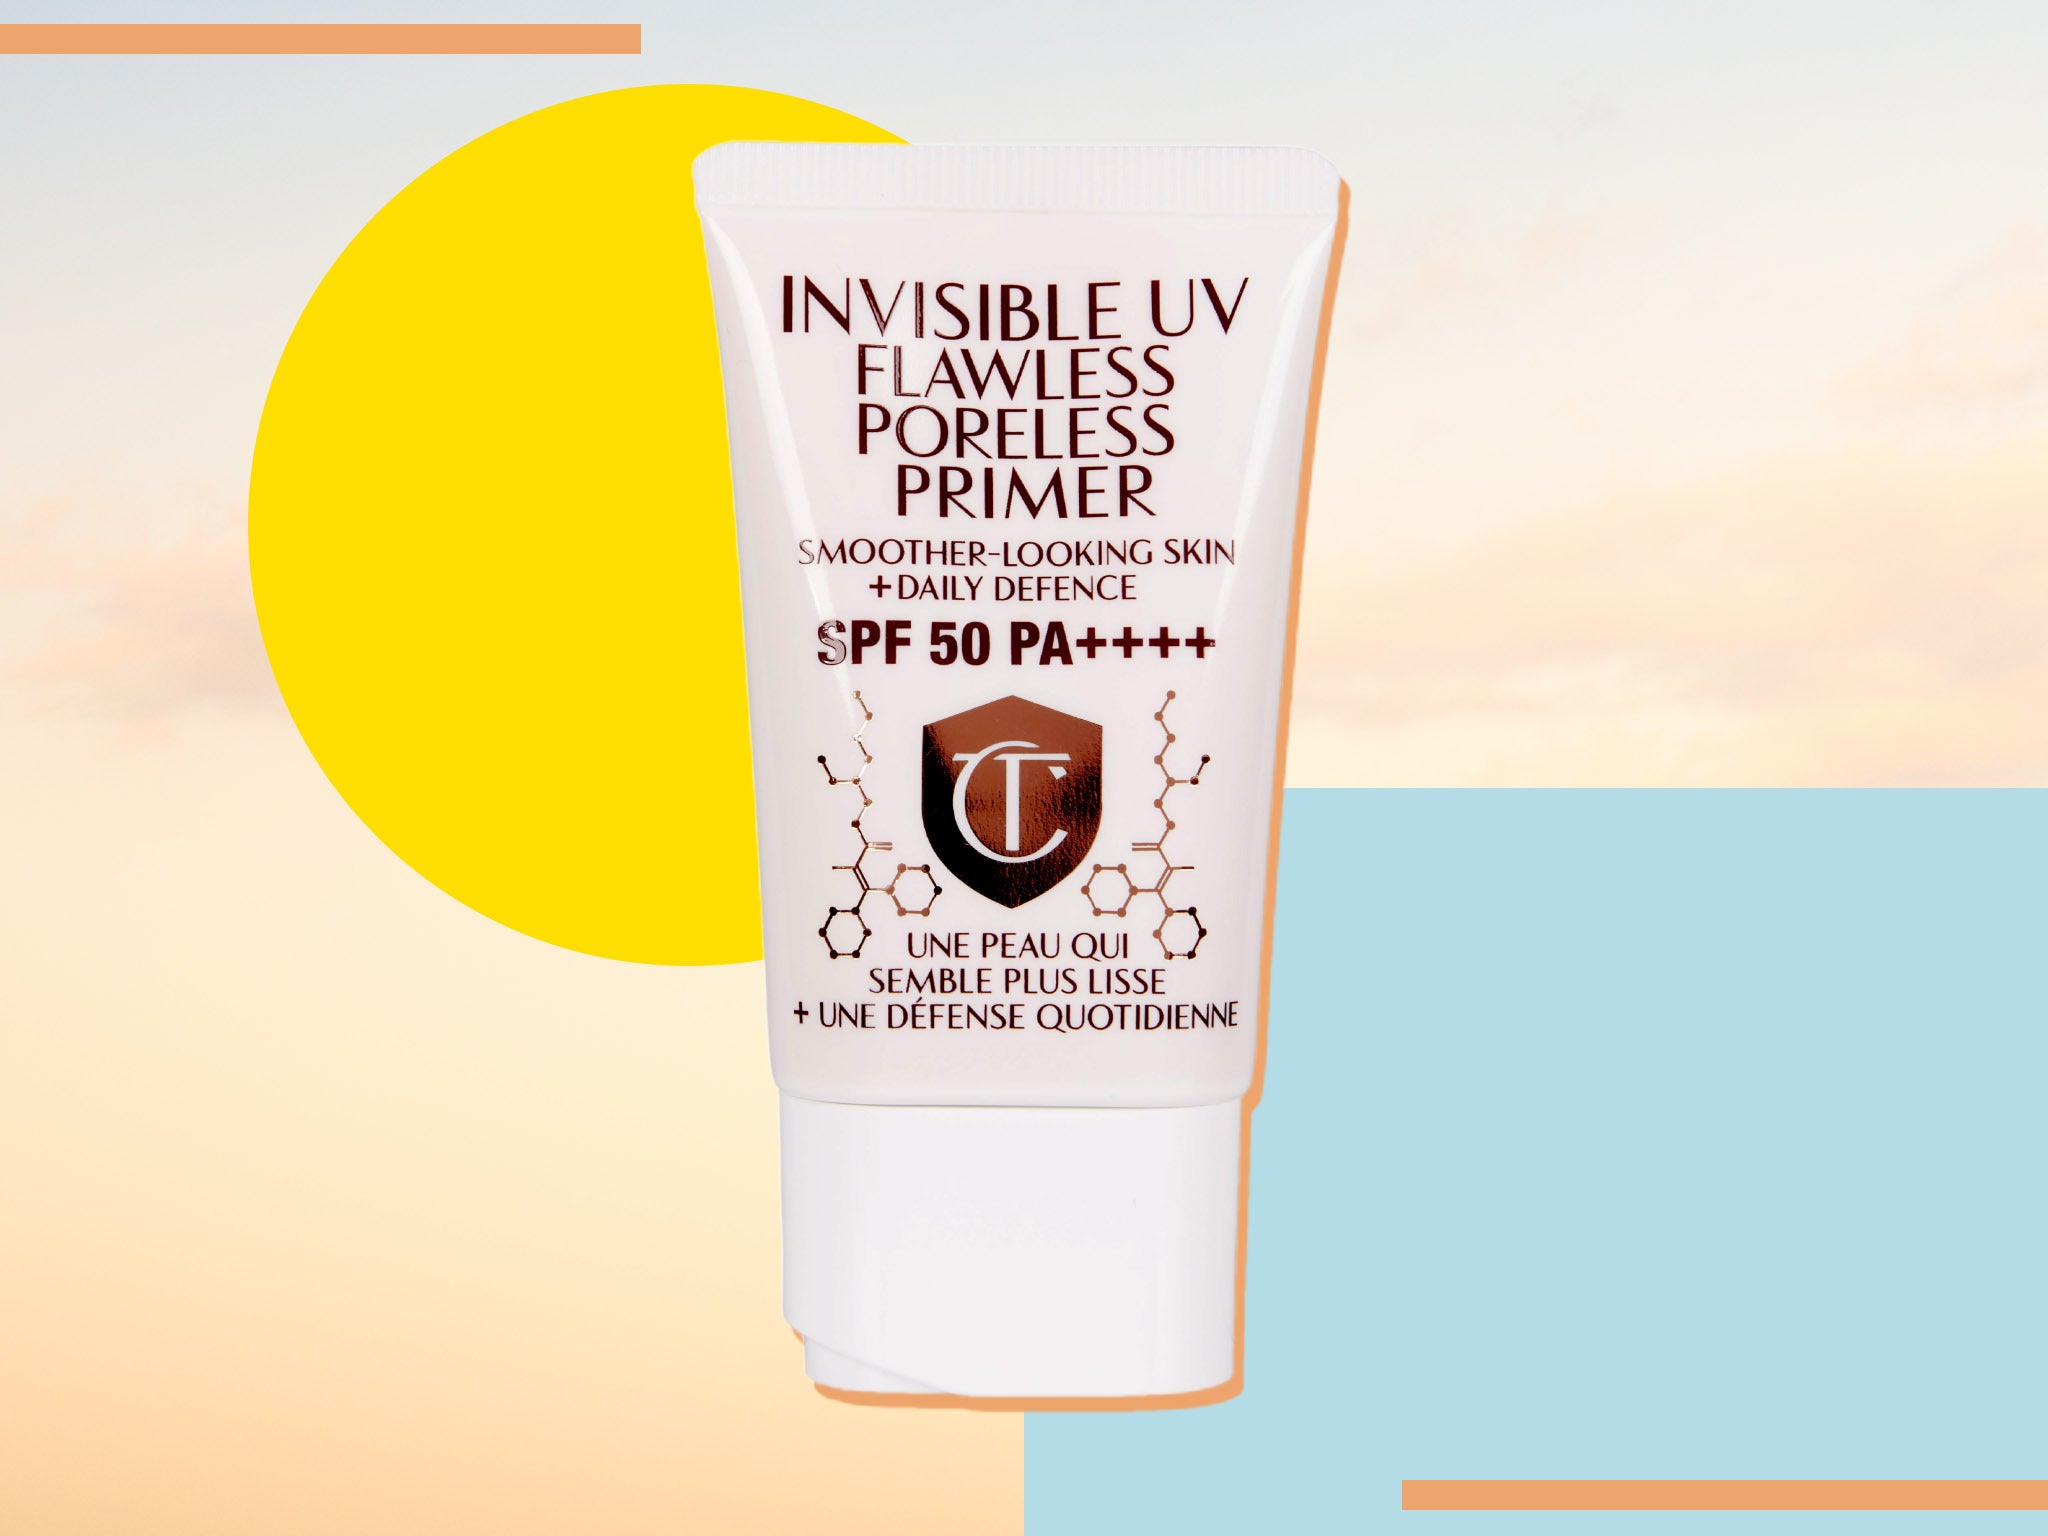 The sunscreen primer hybrid boasts SPF 50 protection and claims to blur imperfections while adding radiance